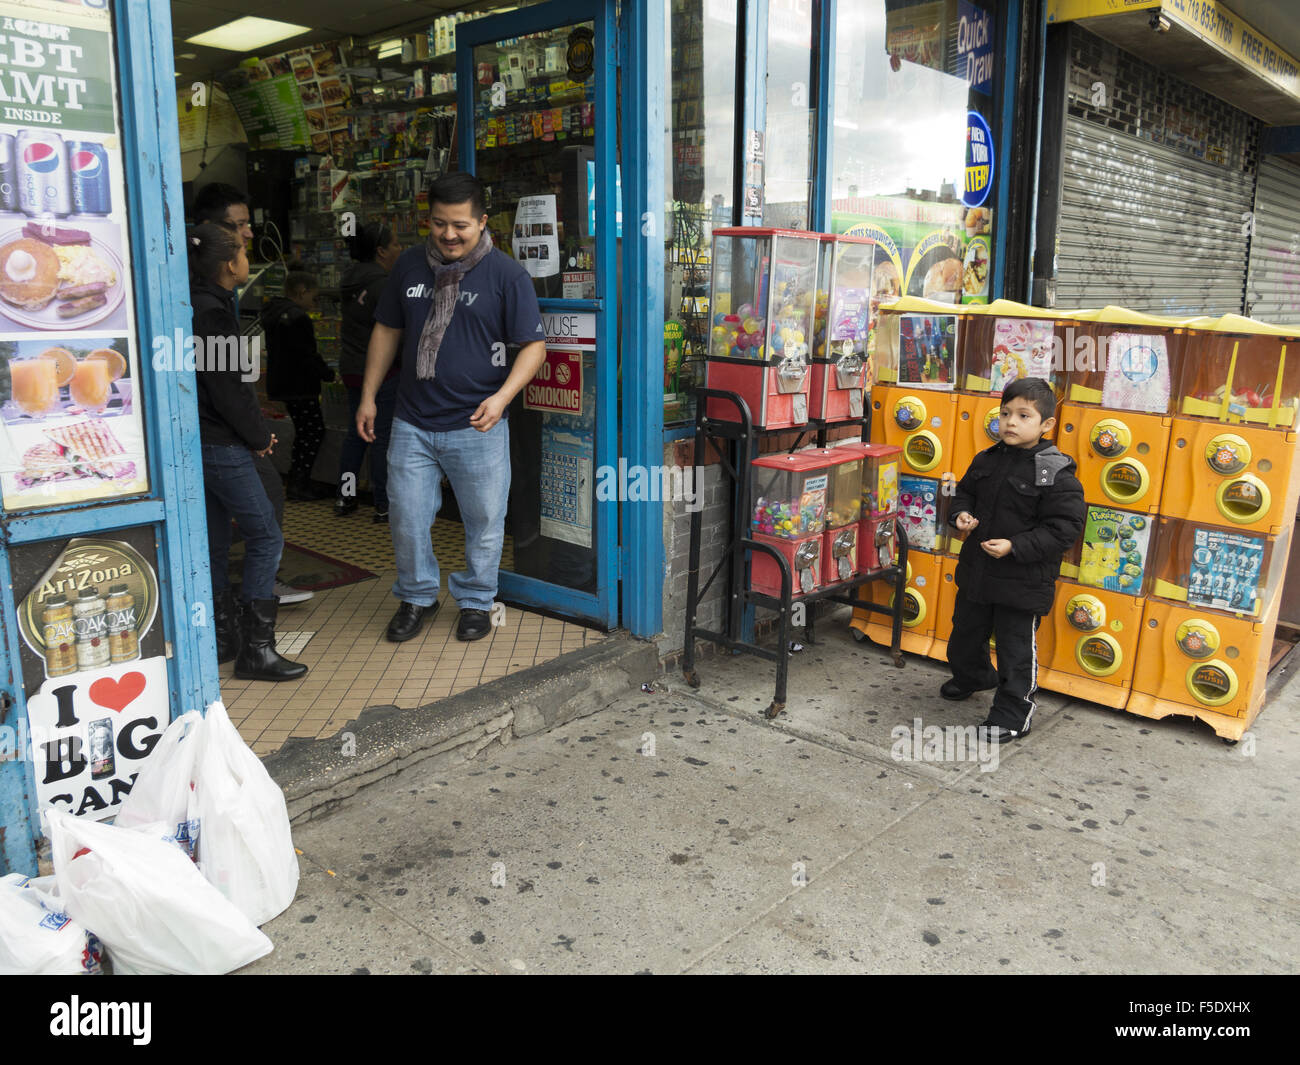 Mexicans in front of bodega in the Kensington section of Brooklyn, New York, 2015. Boy is wearing Day of the Dead face makeup. Stock Photo